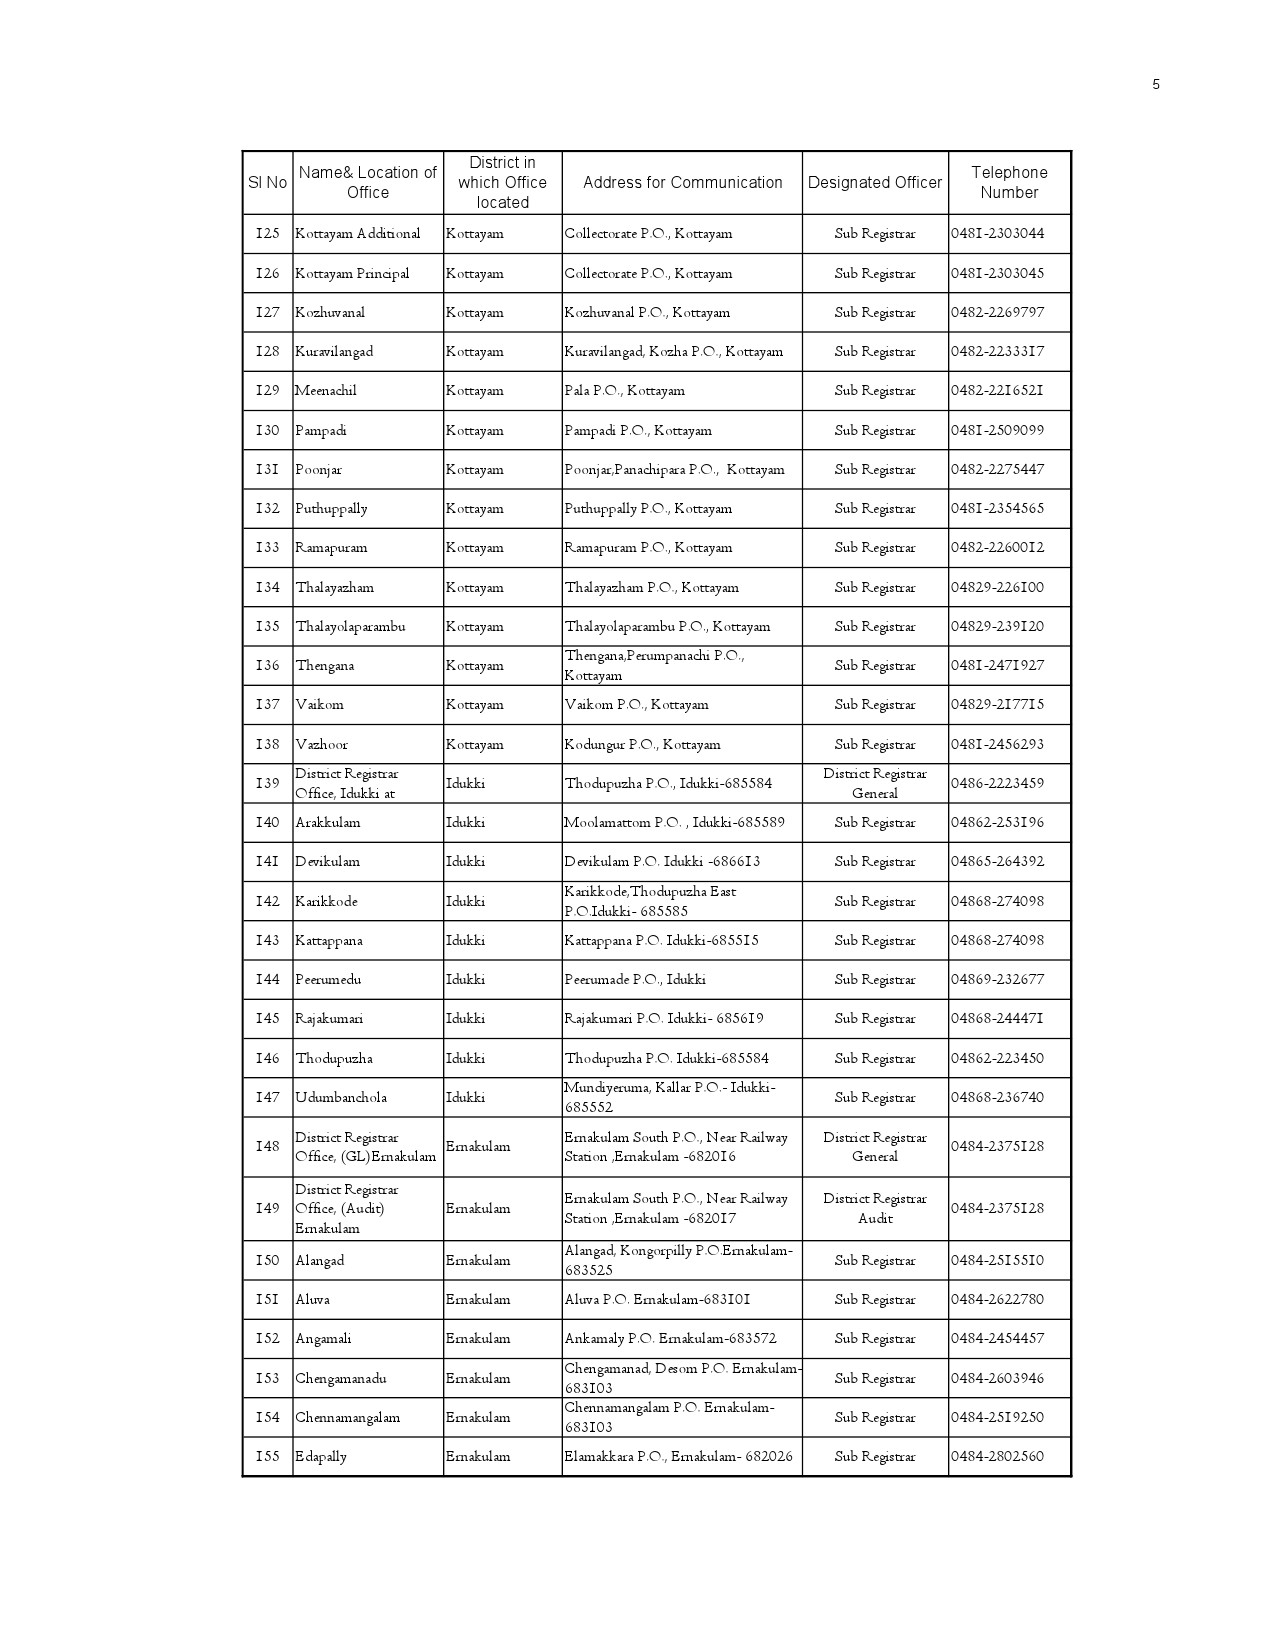 List of Offices in Kerala under the Department of Registration - Notification Image 5